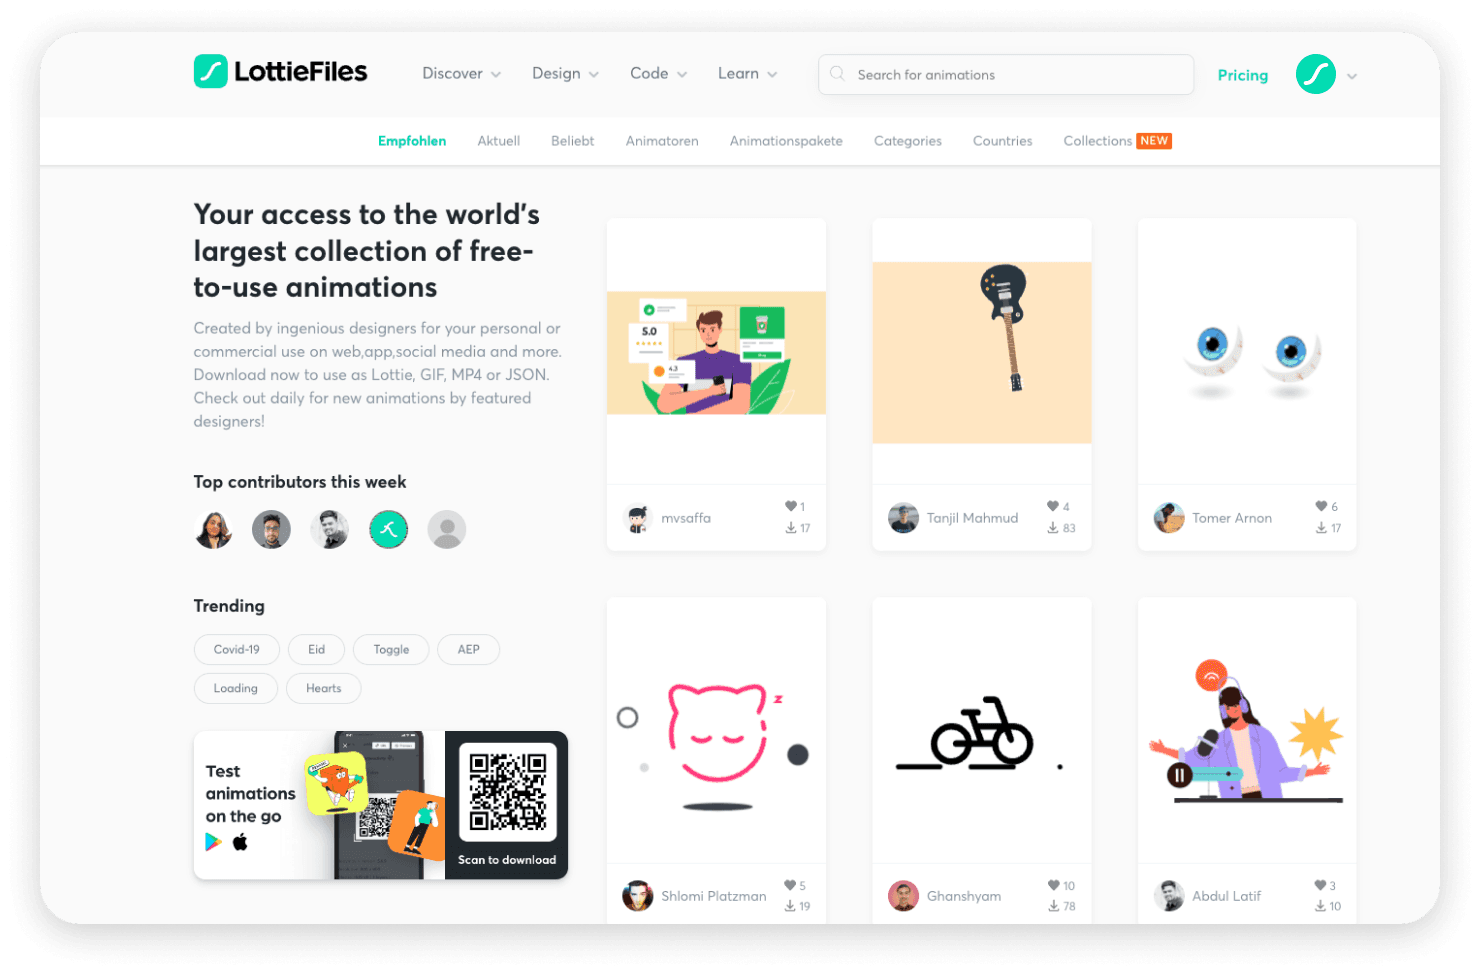 LottieFiles featured animations page